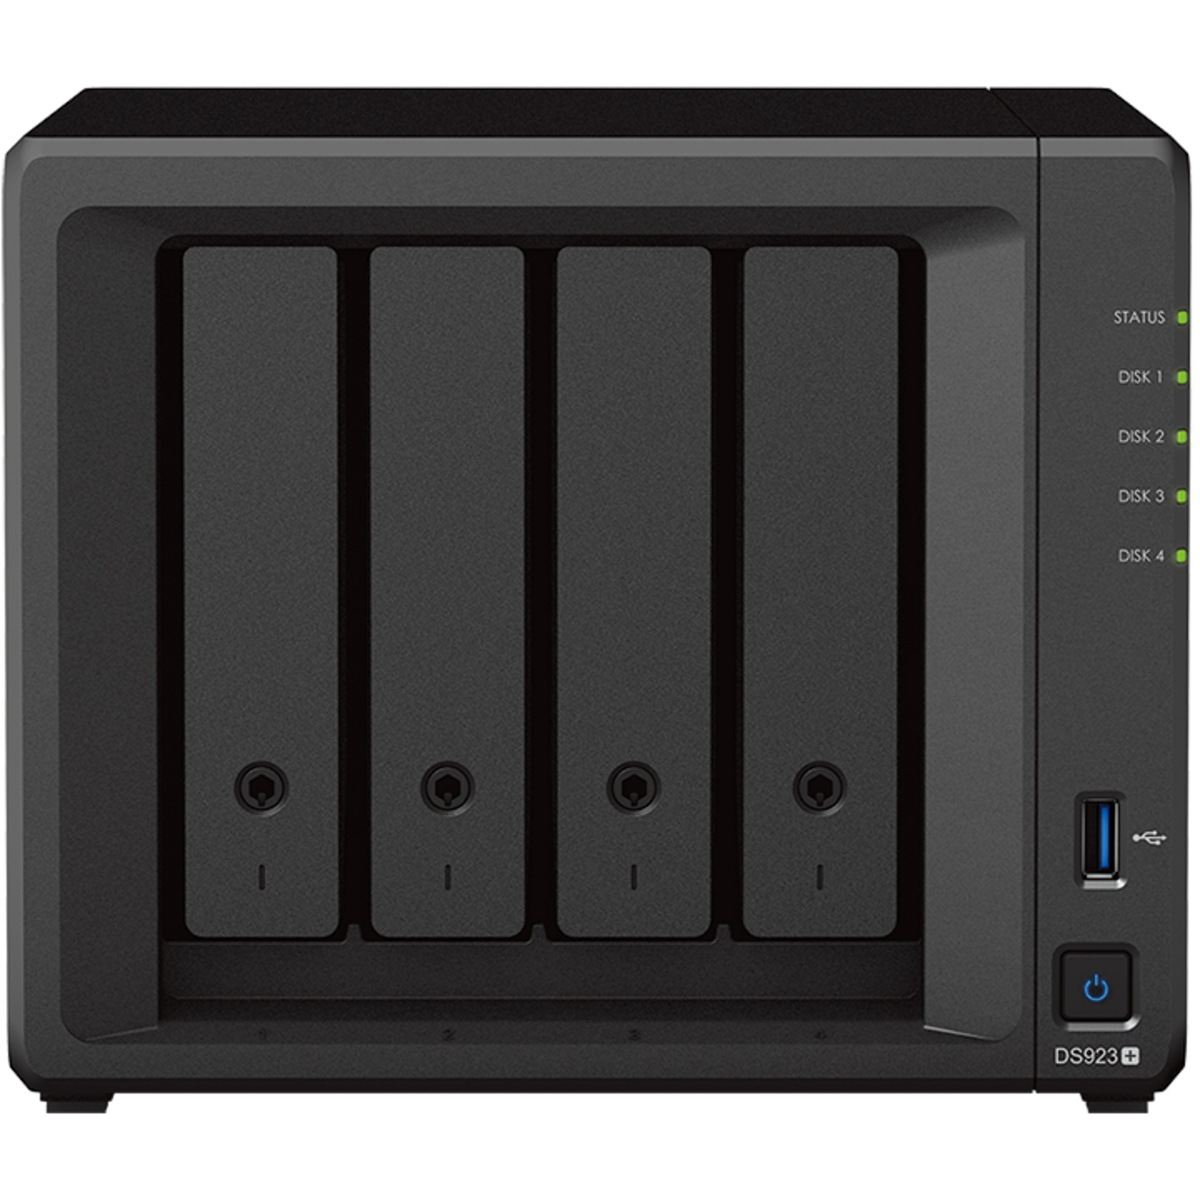 Synology DiskStation DS923+ 24tb 4-Bay Desktop Multimedia / Power User / Business NAS - Network Attached Storage Device 4x6tb Western Digital Red Pro WD6003FFBX 3.5 7200rpm SATA 6Gb/s HDD NAS Class Drives Installed - Burn-In Tested - ON SALE - FREE RAM UPGRADE DiskStation DS923+